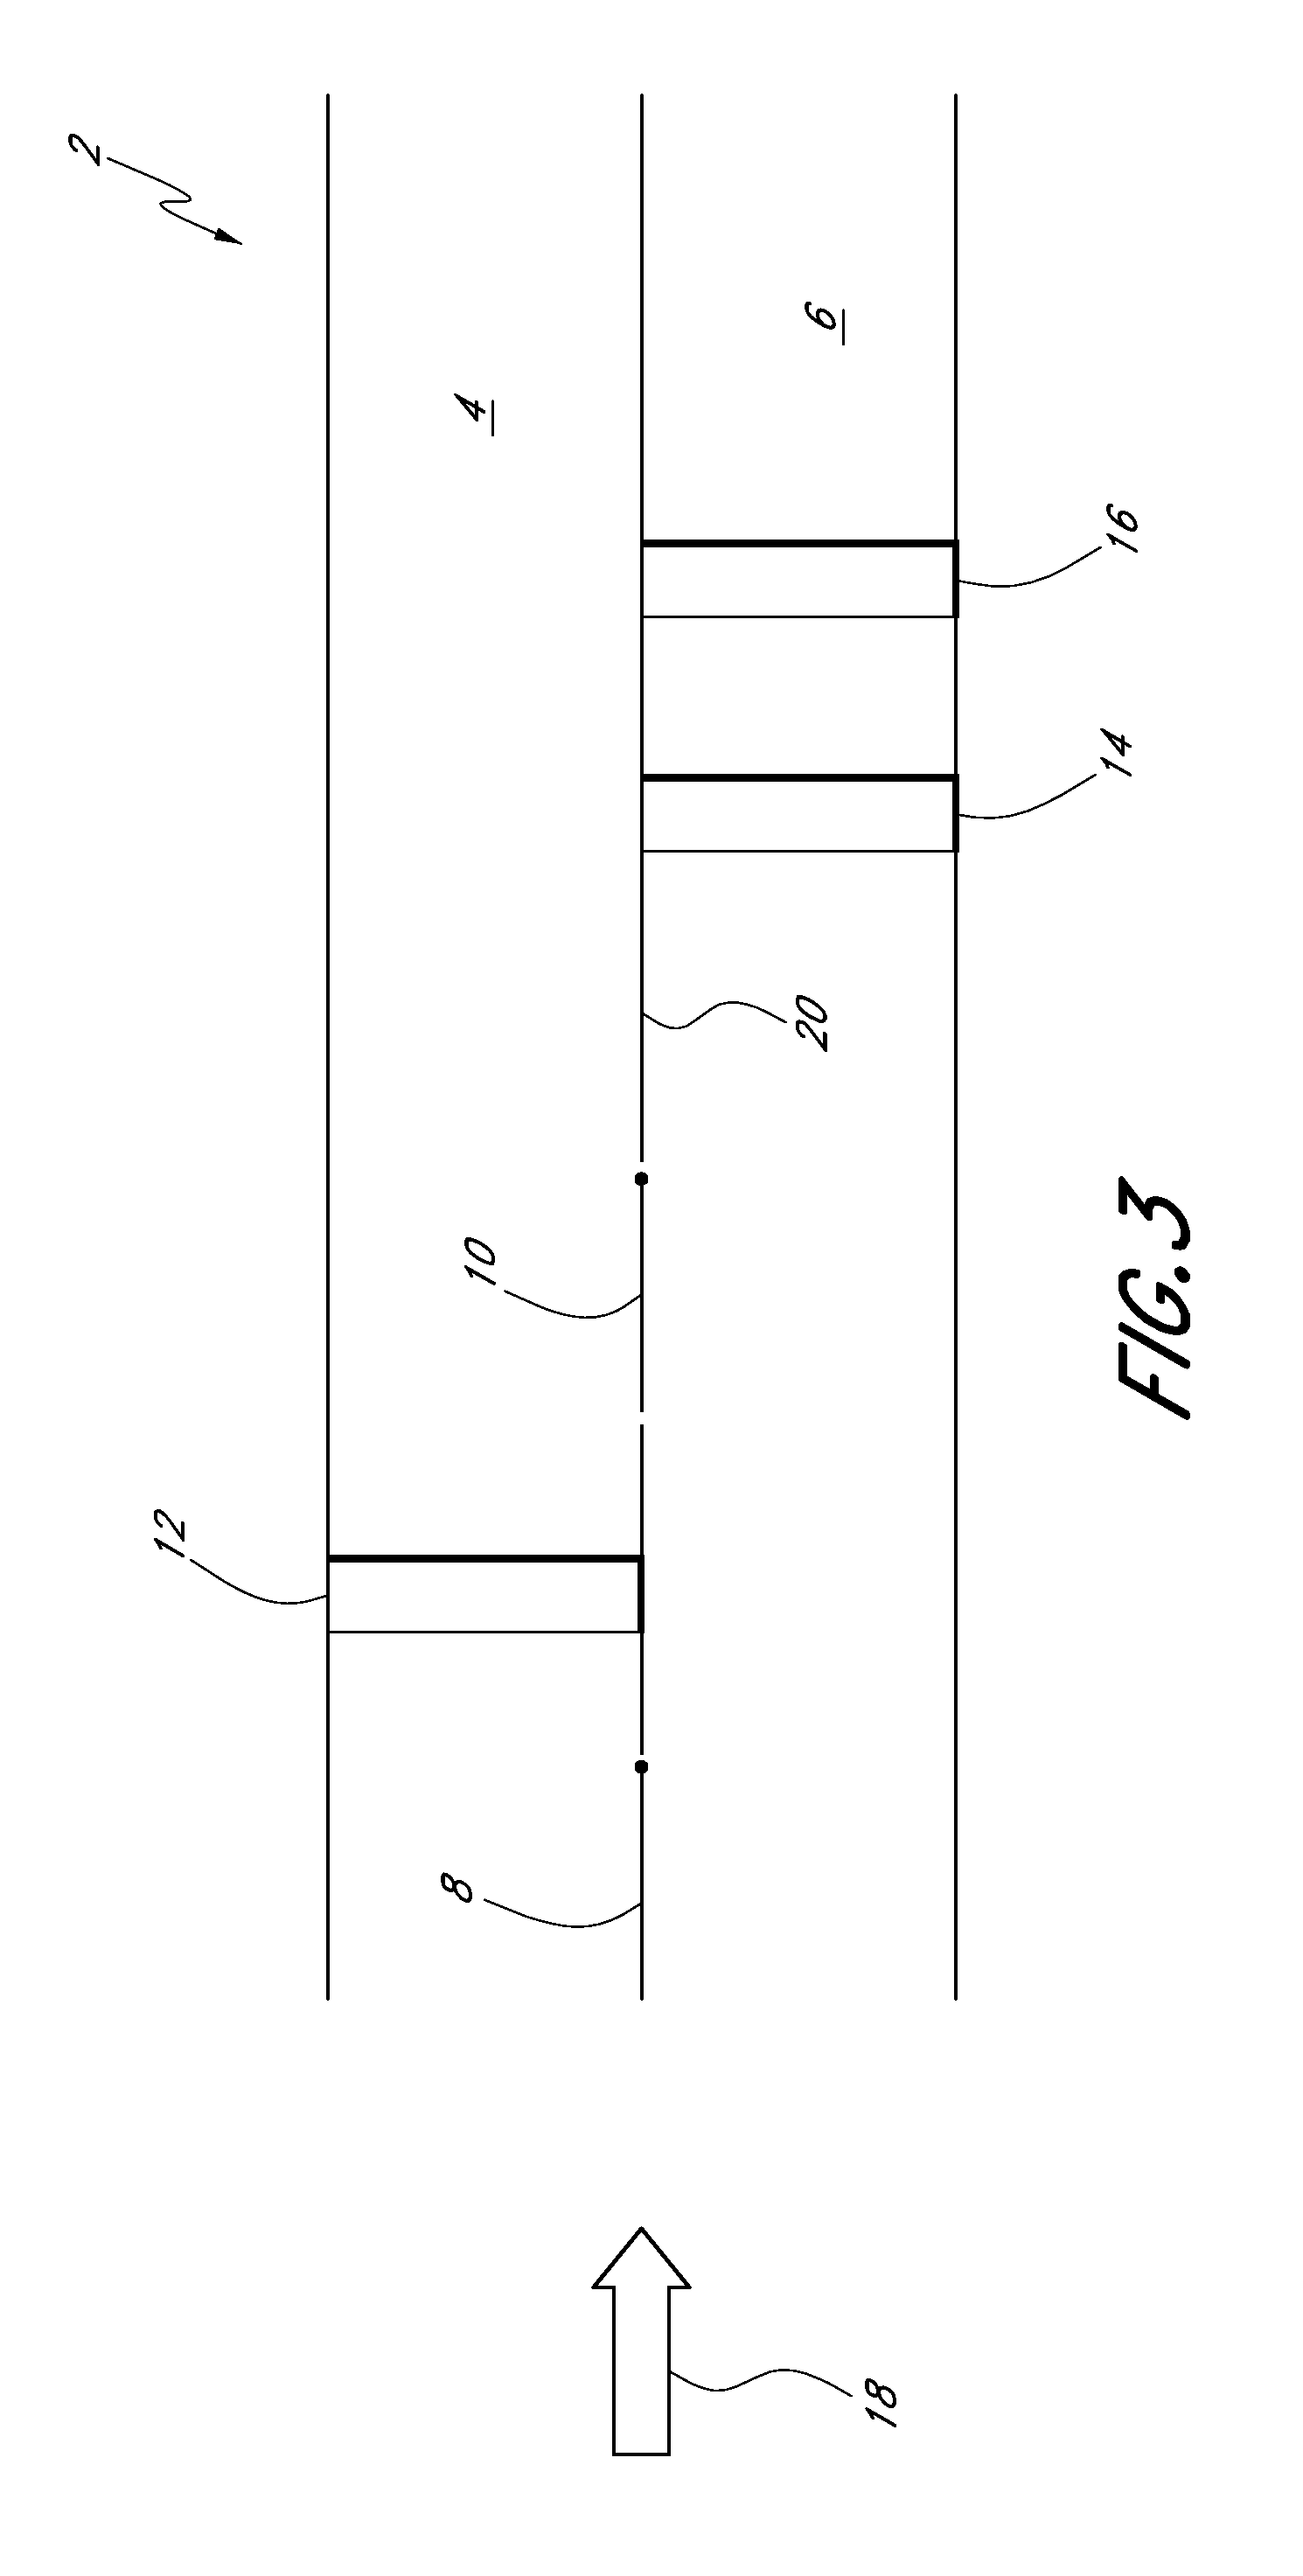 Heater-cooler with bithermal thermoelectric device